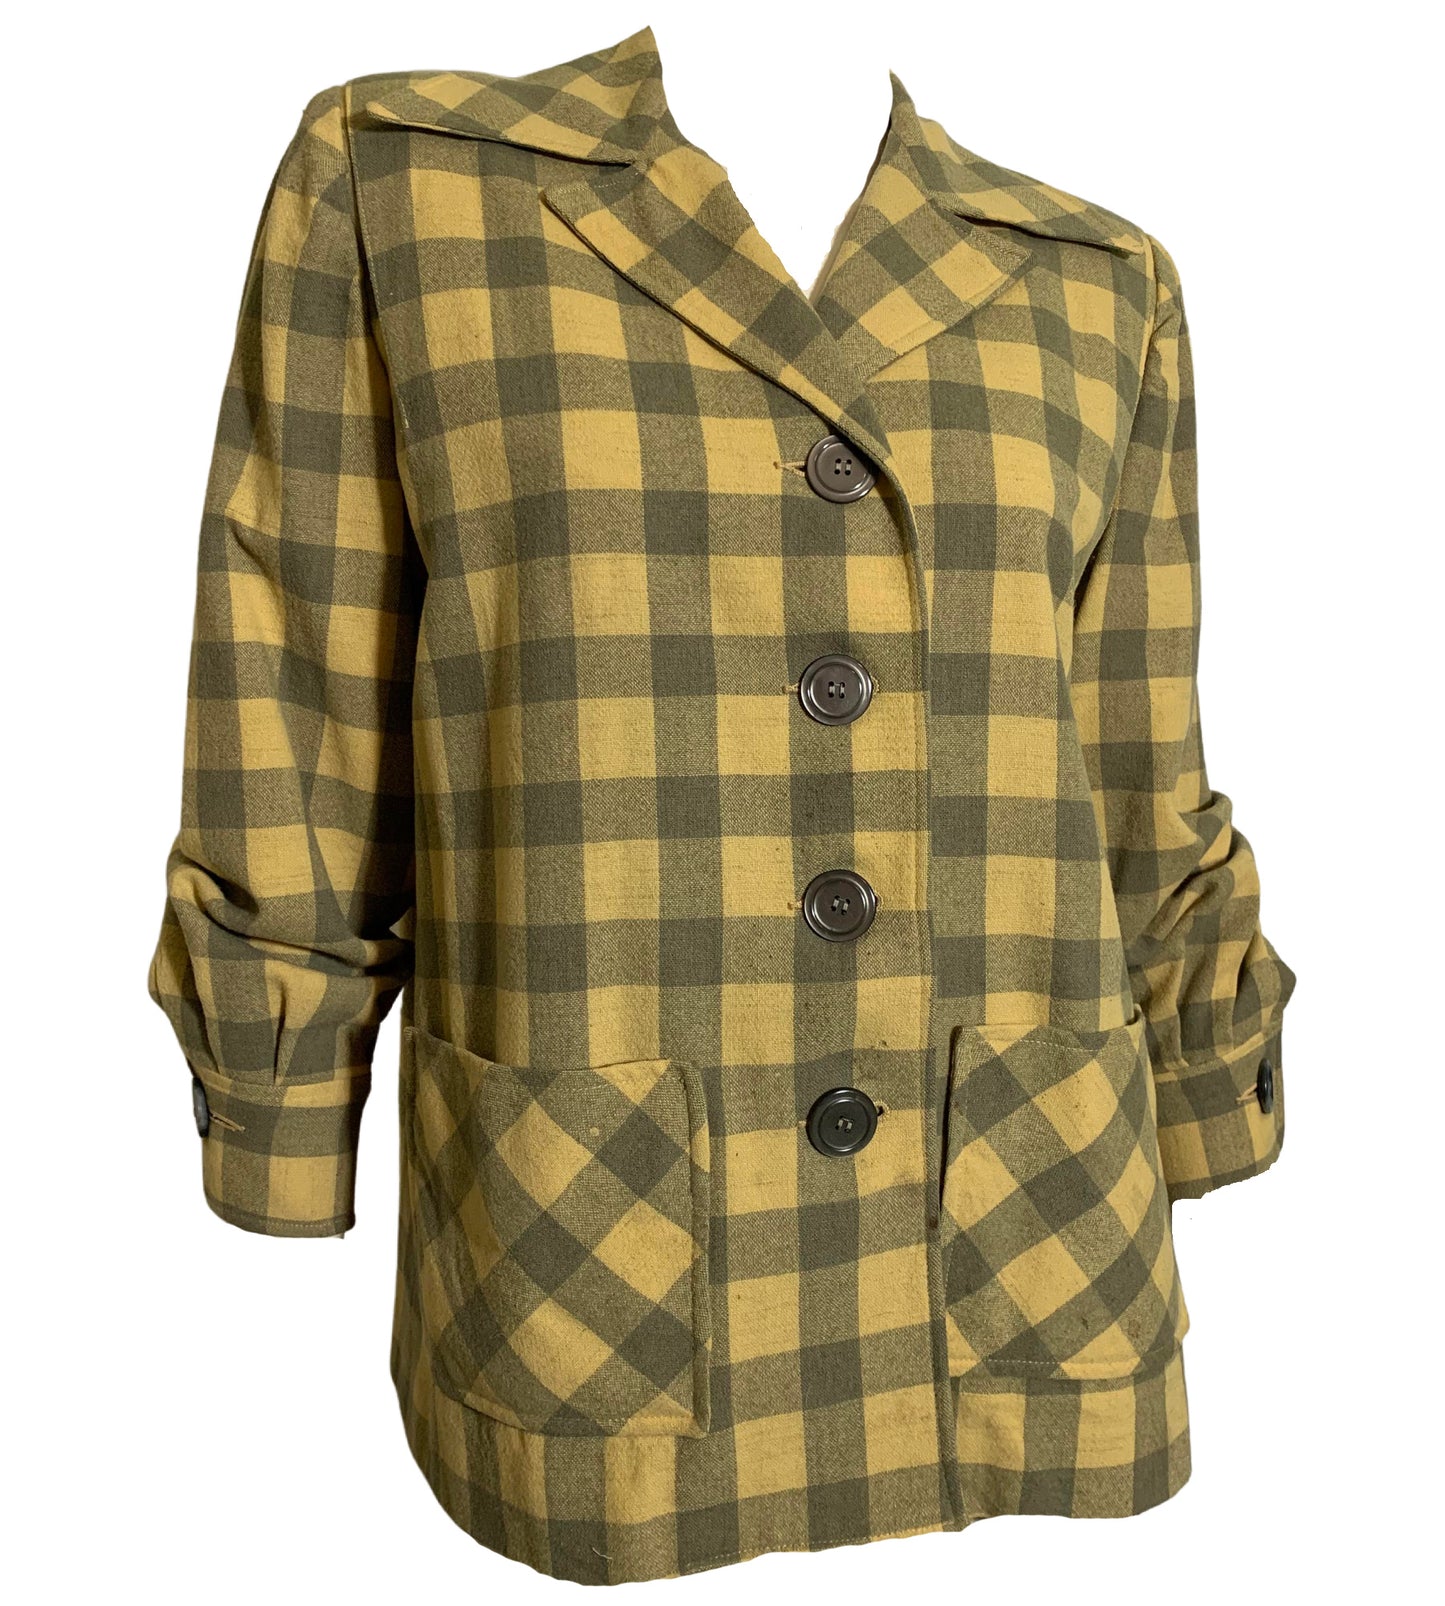 49er Style Yellow and Grey Checked Wool Jacket circa 1940s